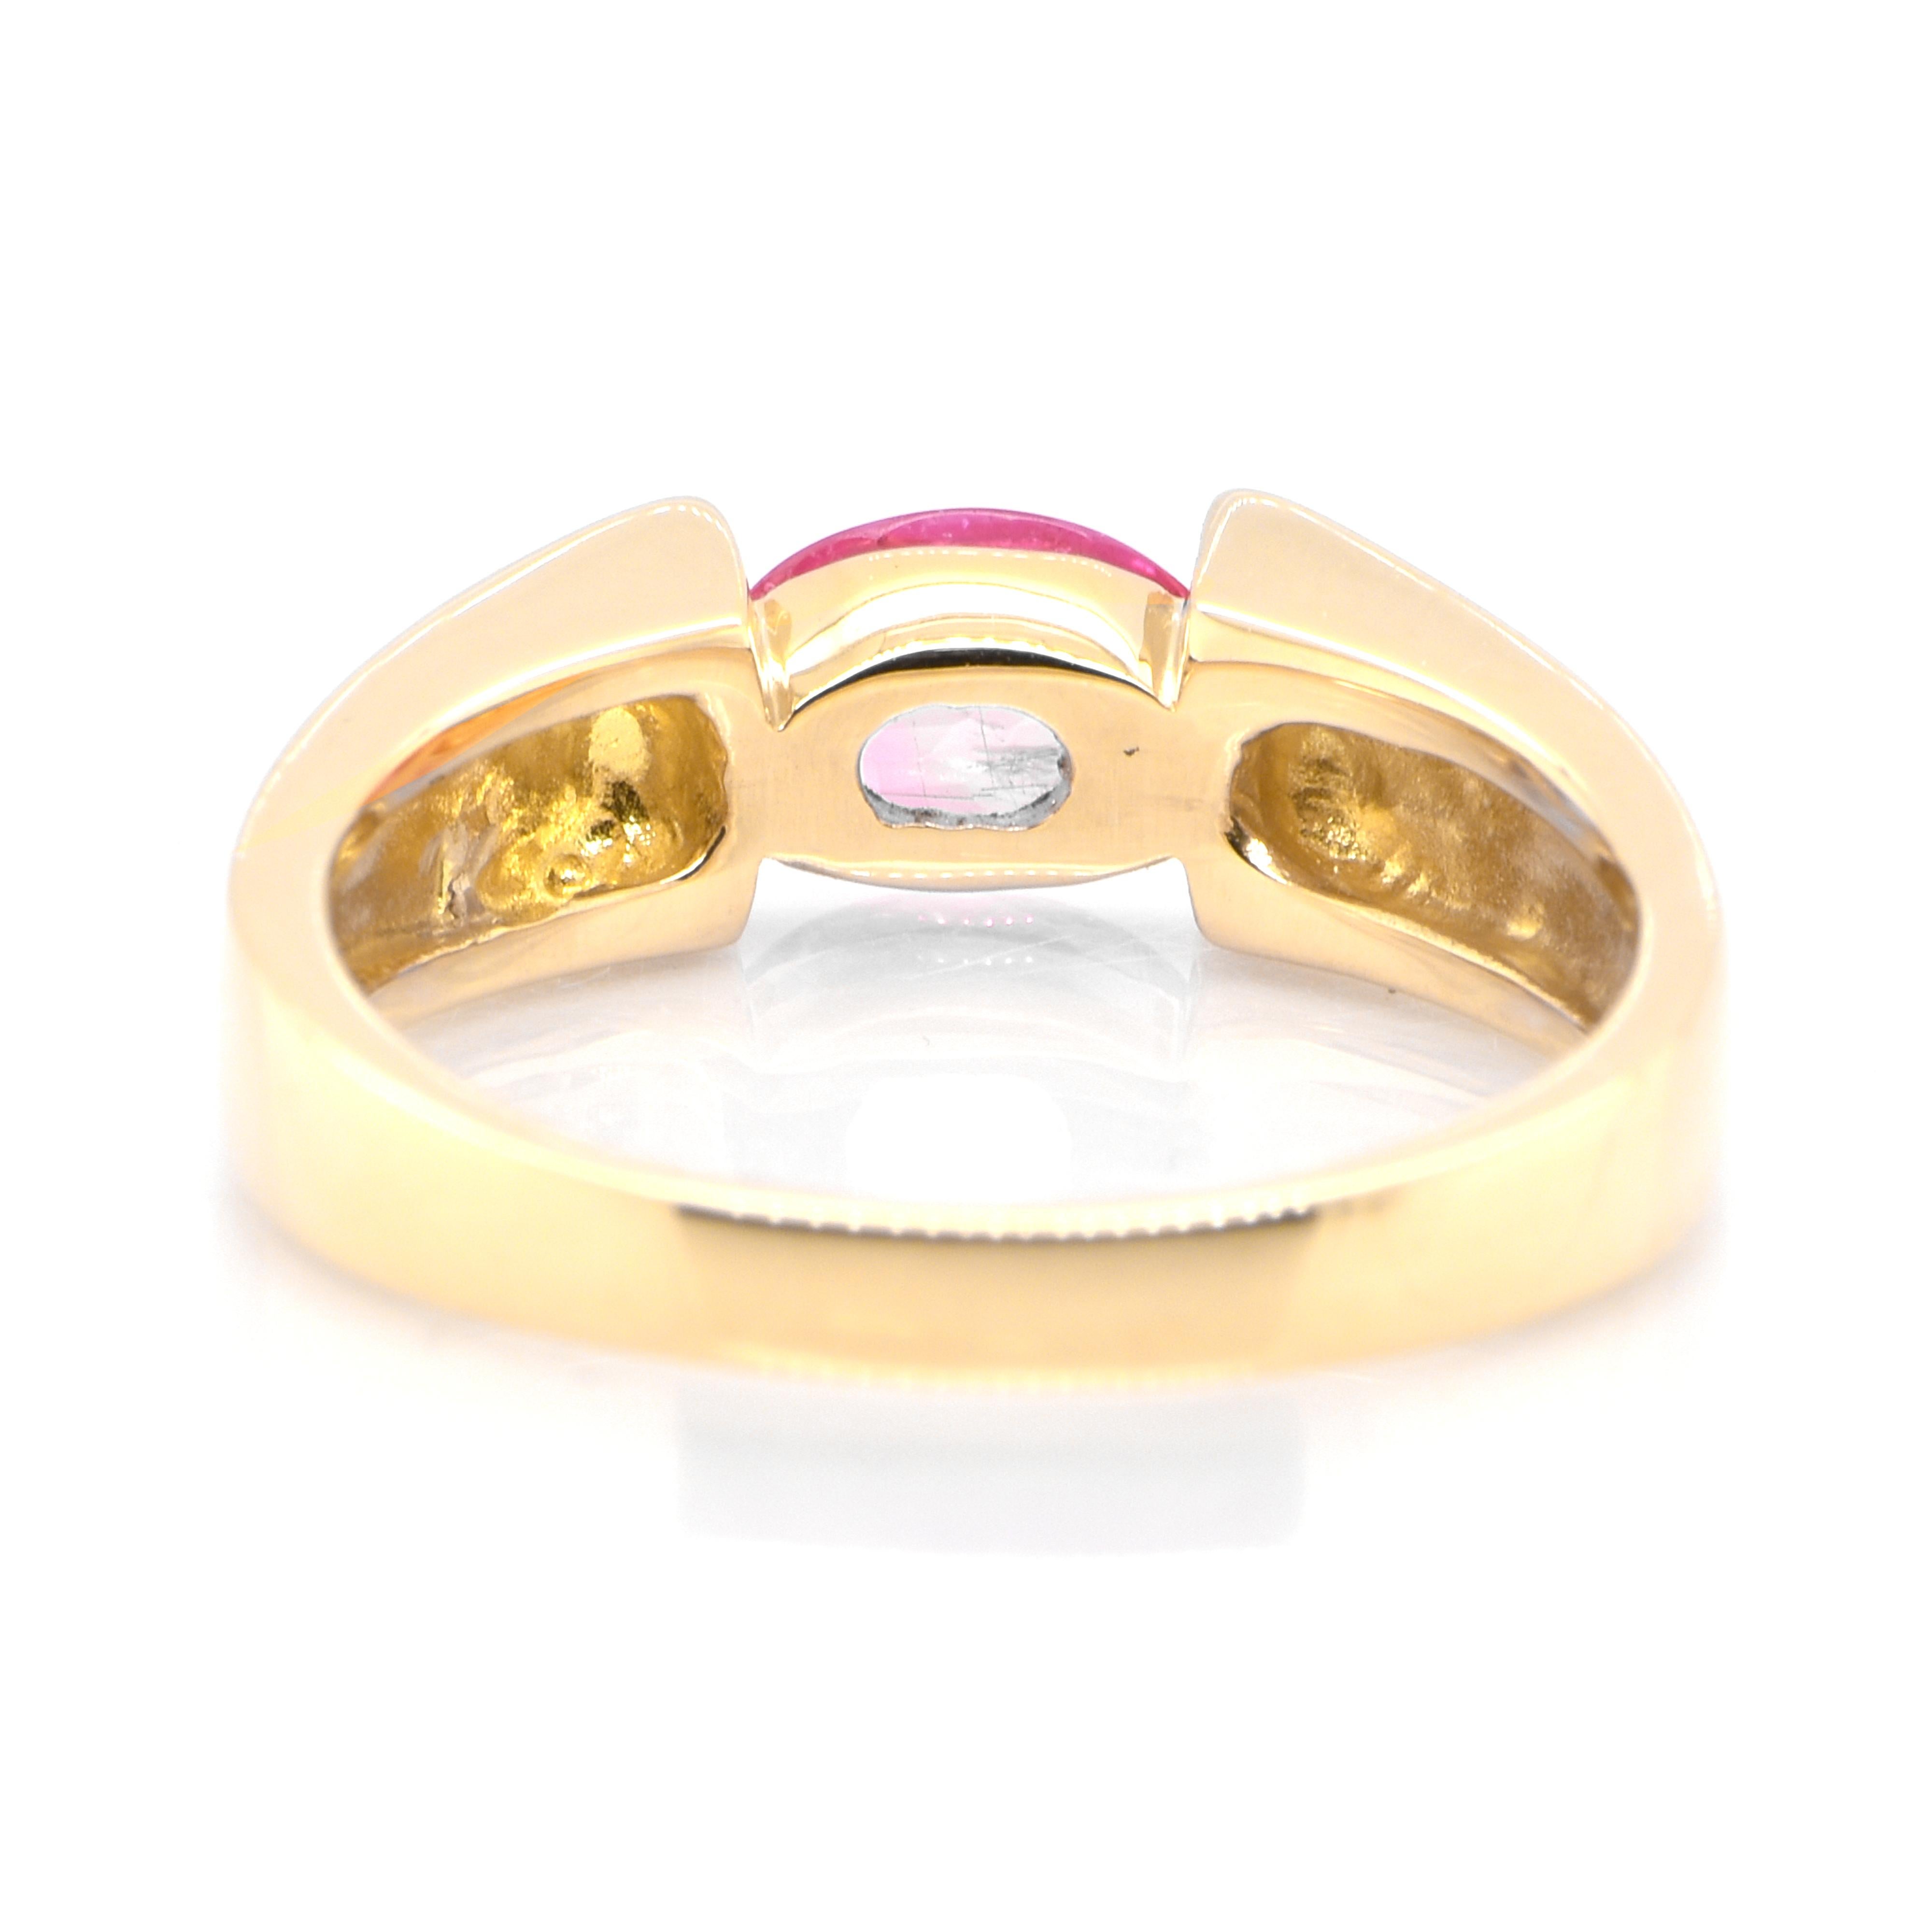 Oval Cut 0.99 Carat Natural Padparadscha Sapphire Signet Ring Set in 18 Karat Gold For Sale